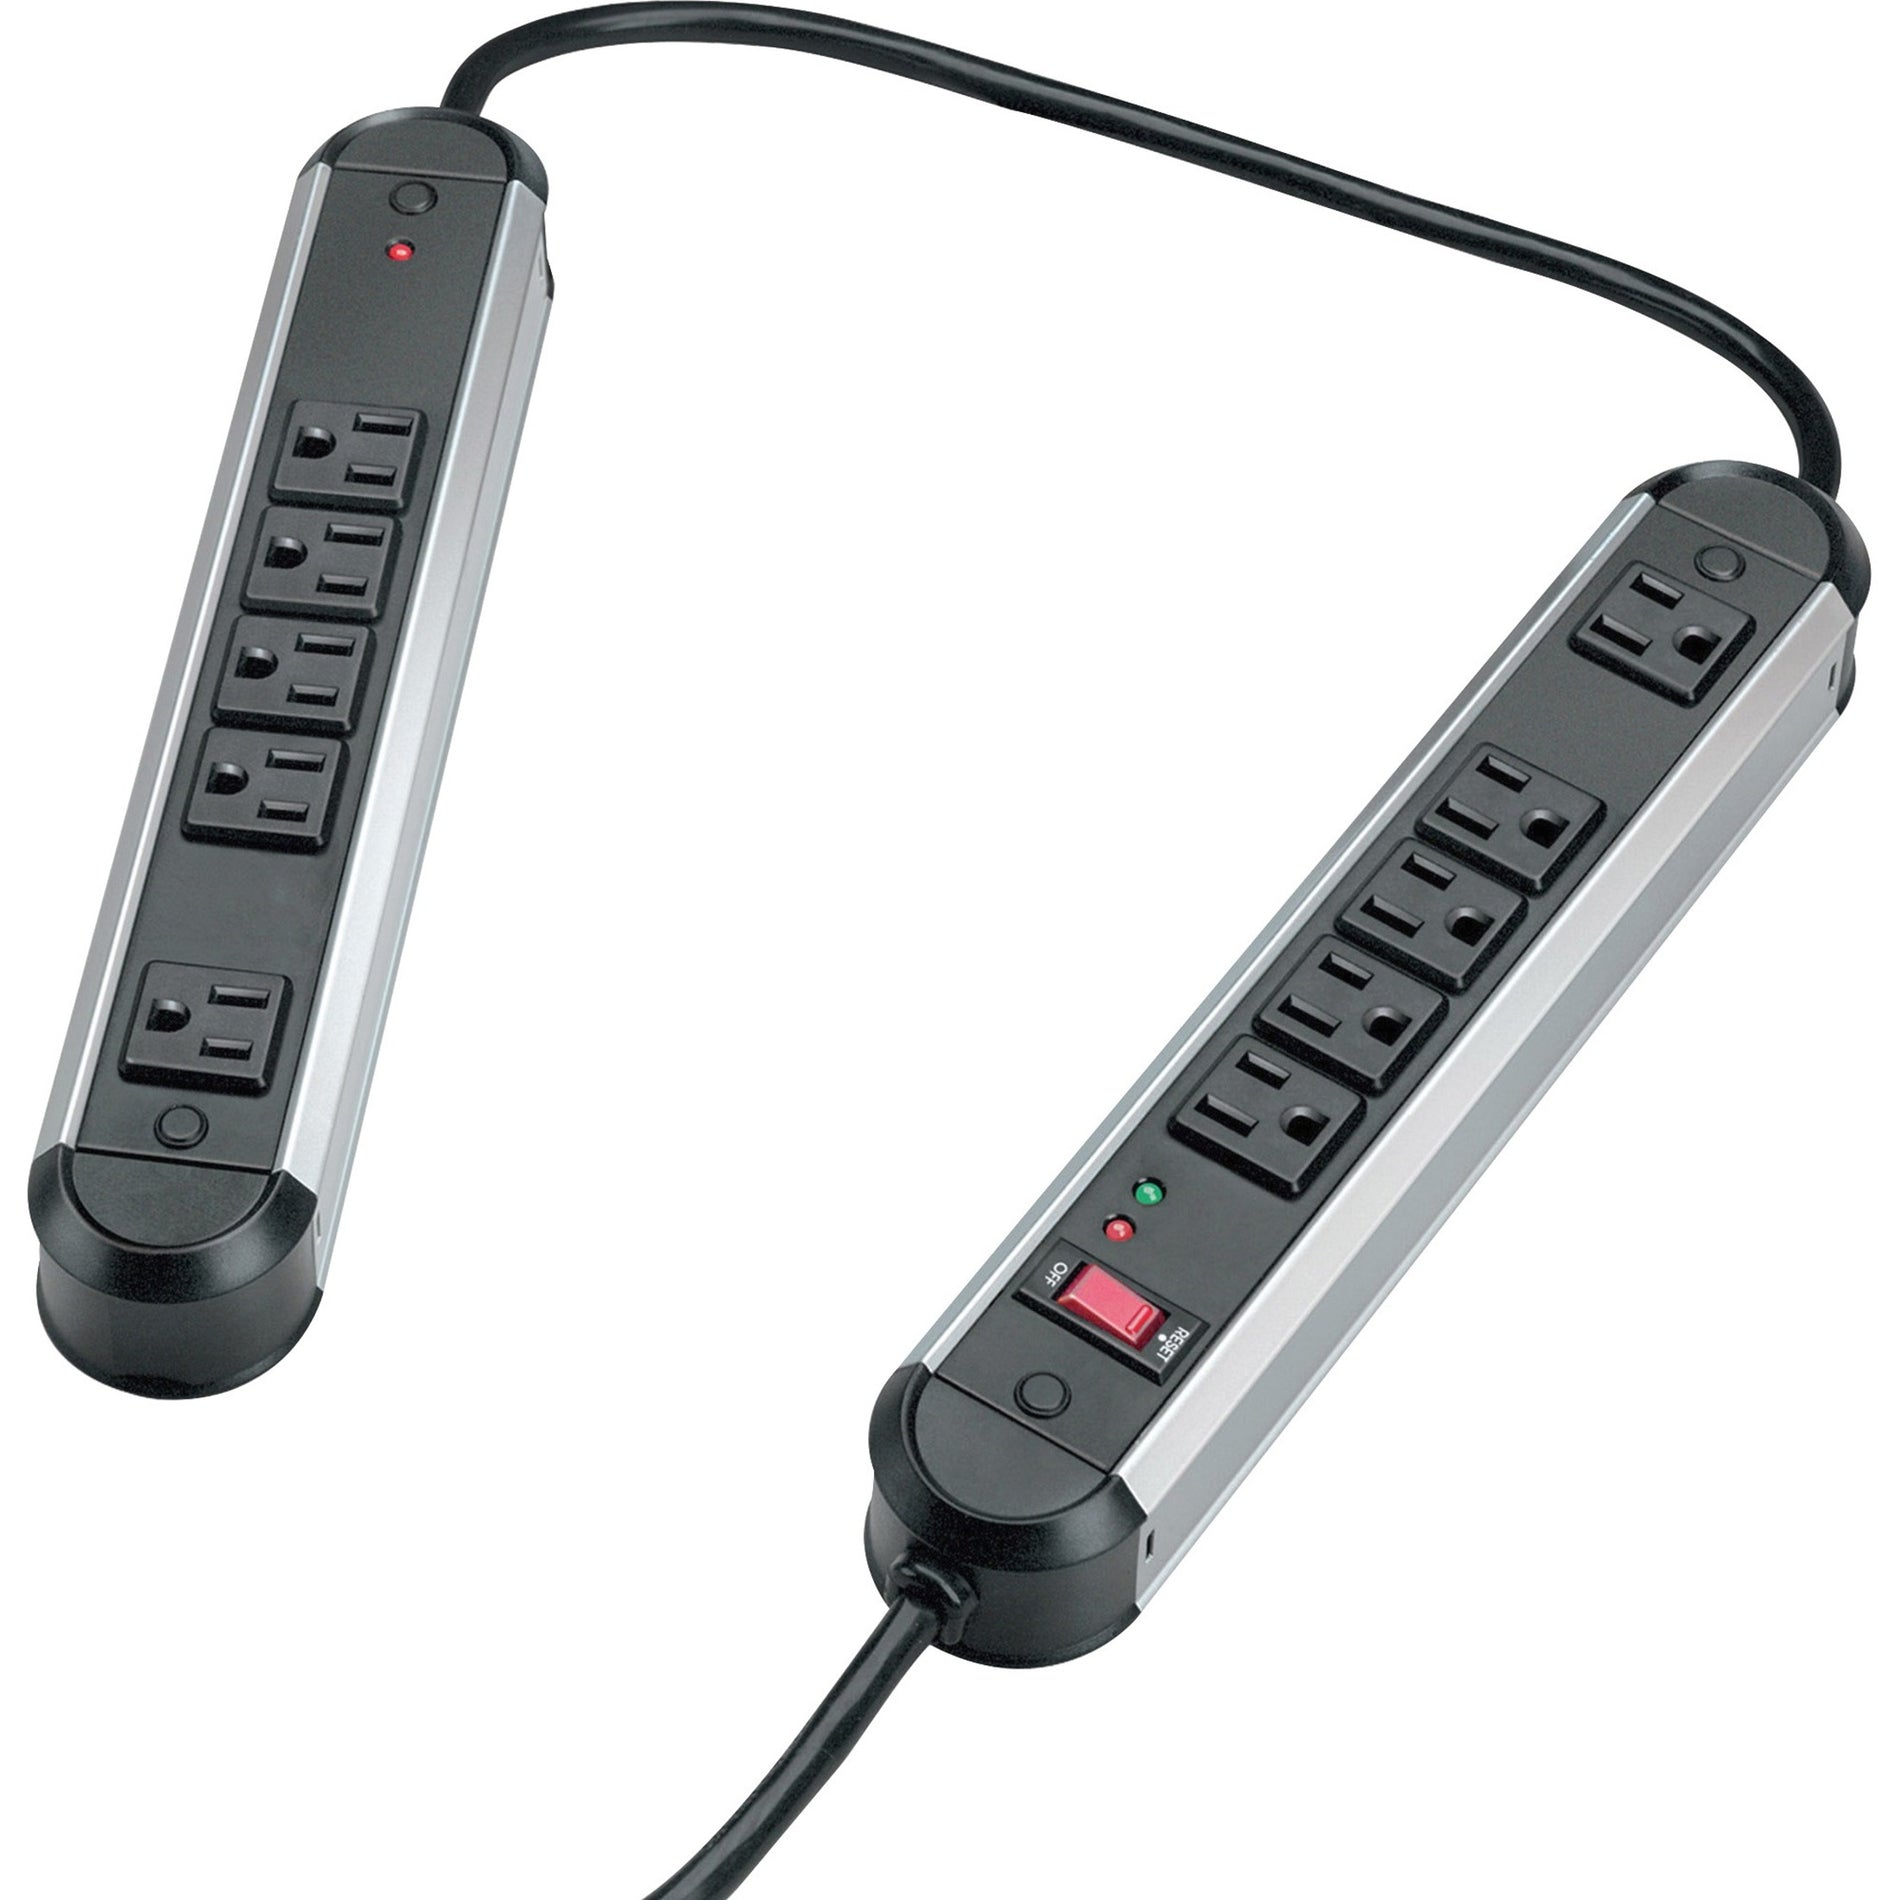 Fellowes 99082 Metal Split Surge Protector, 1250 Joules, 10 Outlets, 6' Cord, Black